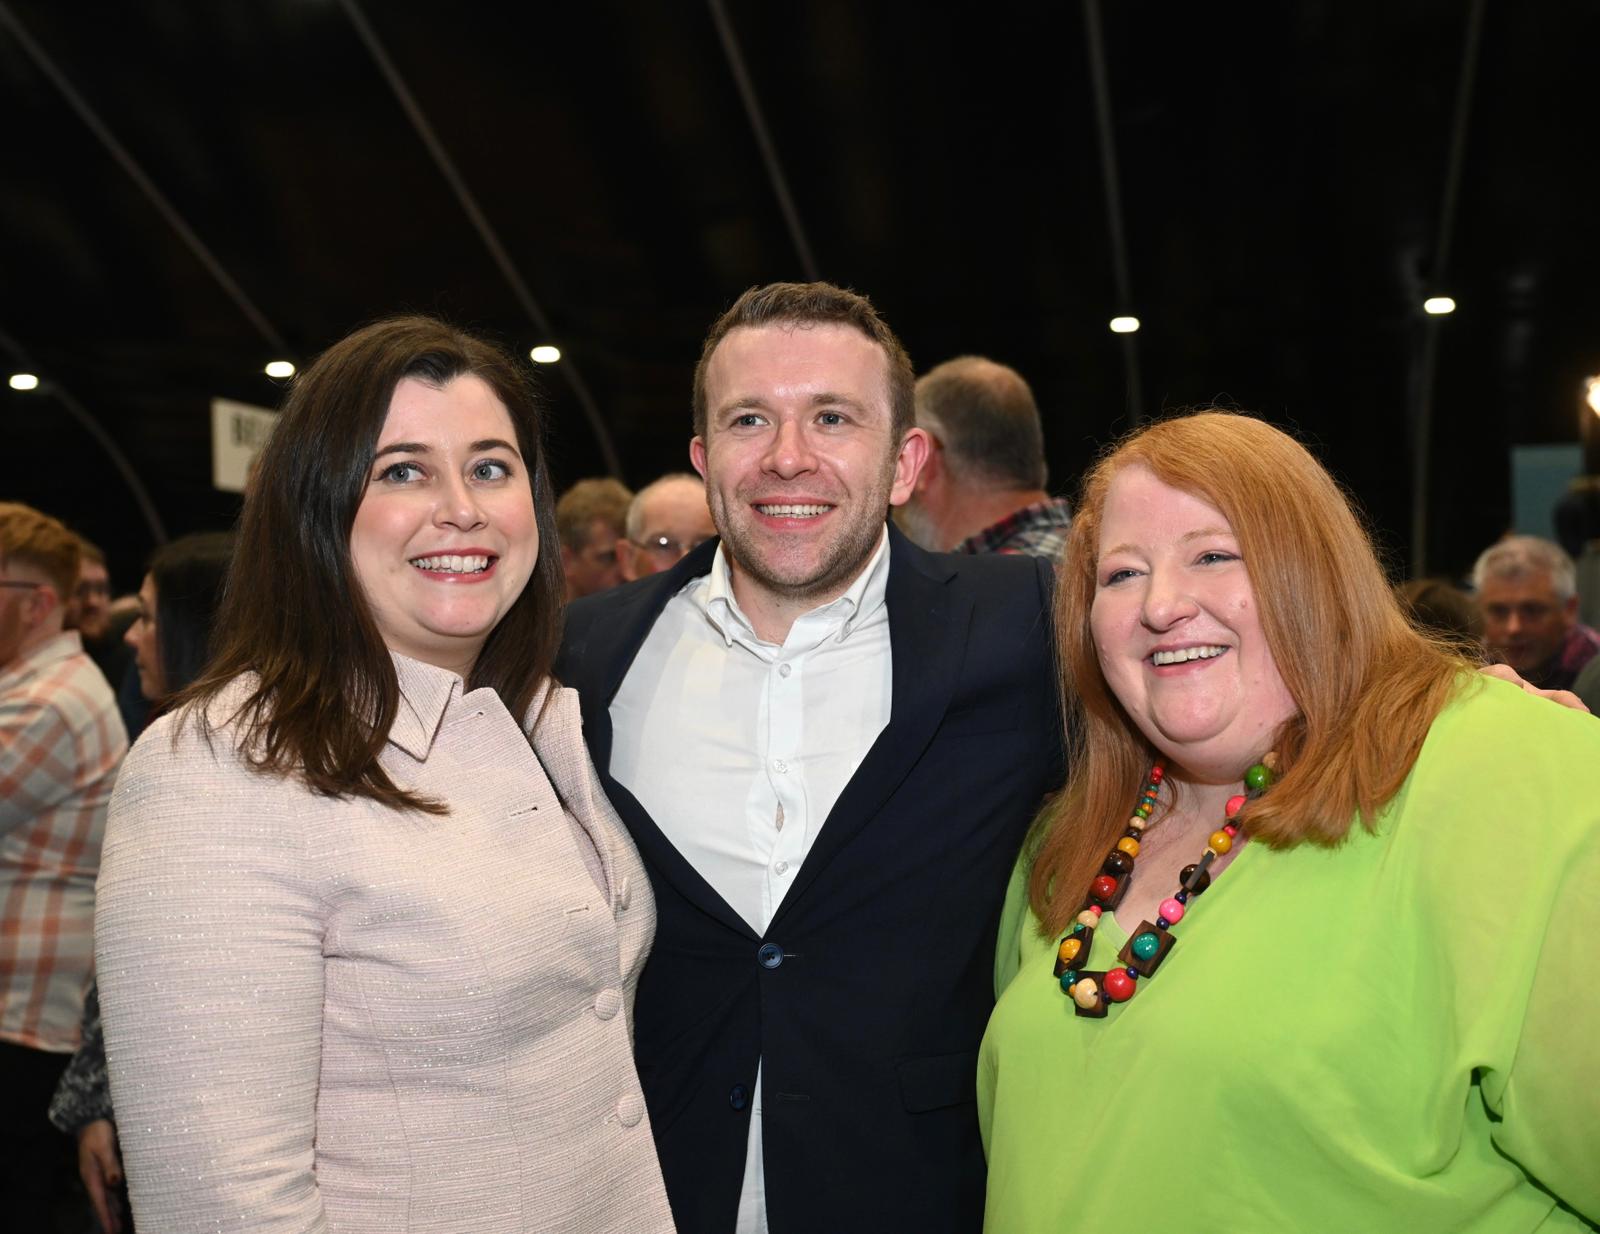 JOYOUS: Peter McReynolds celebrates his election with his wife Eileen and party leader, Naomi Long MLA